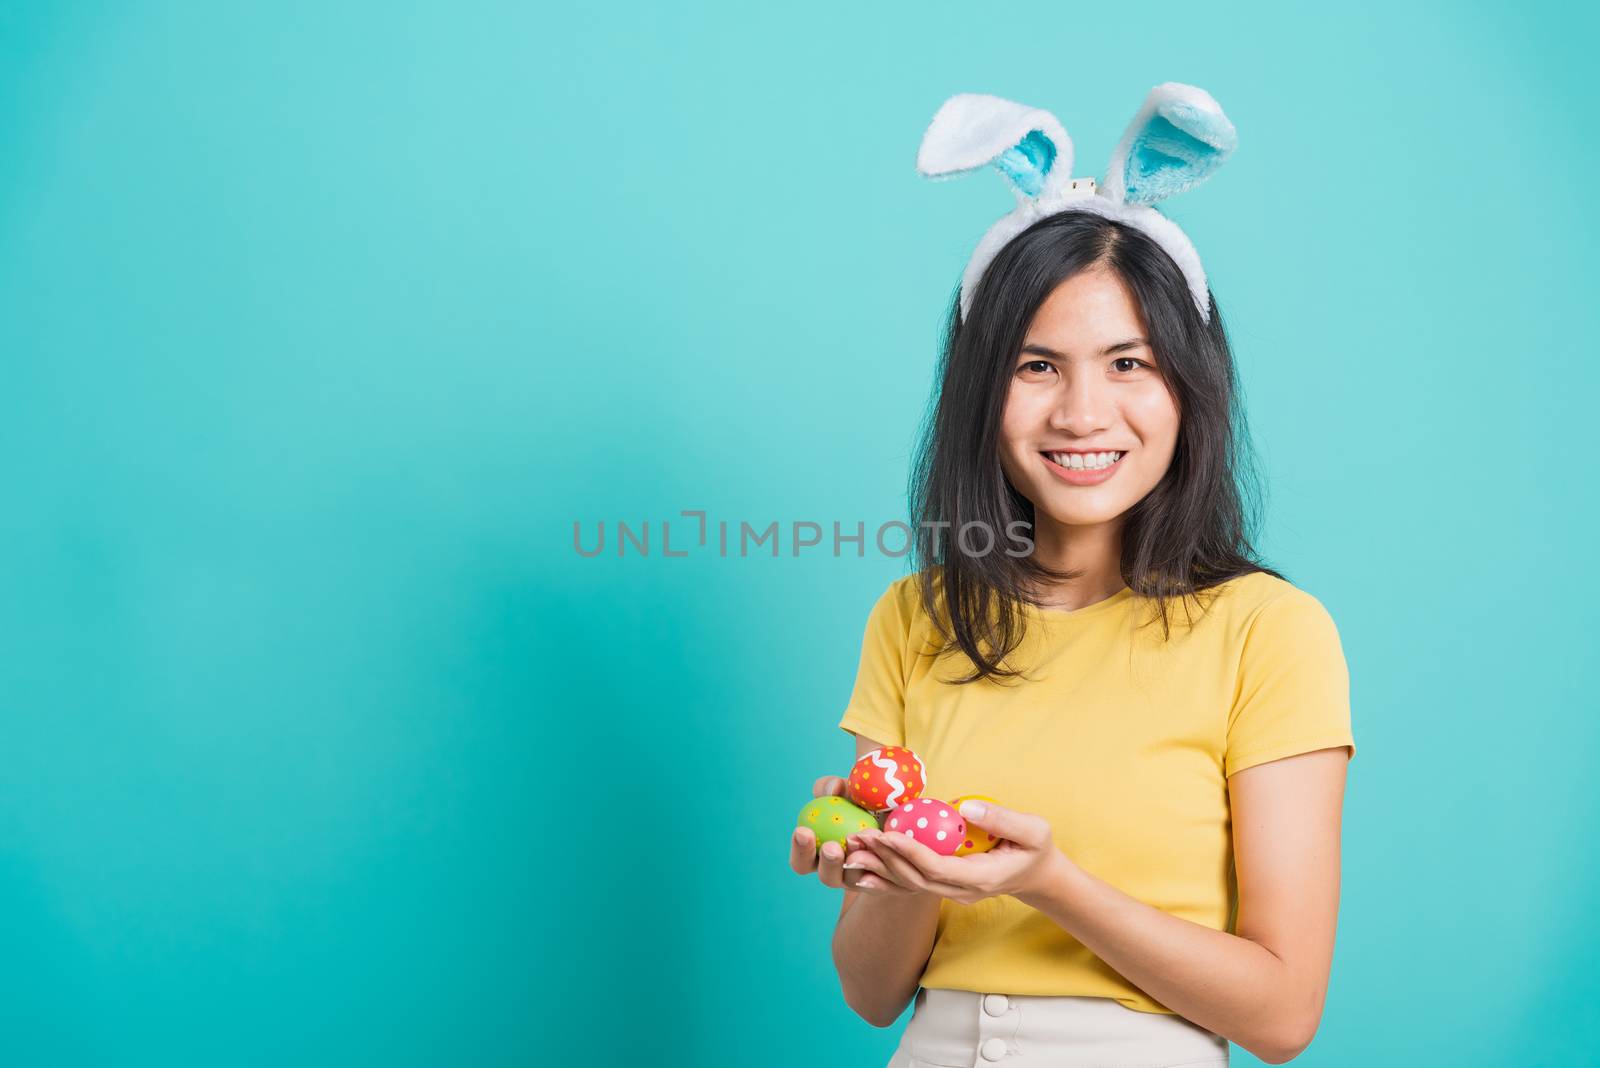 Portrait Asian beautiful happy young woman smile white teeth wear yellow t-shirt standing with bunny ears and holding Easter eggs looking to camera, on a blue background with copy space